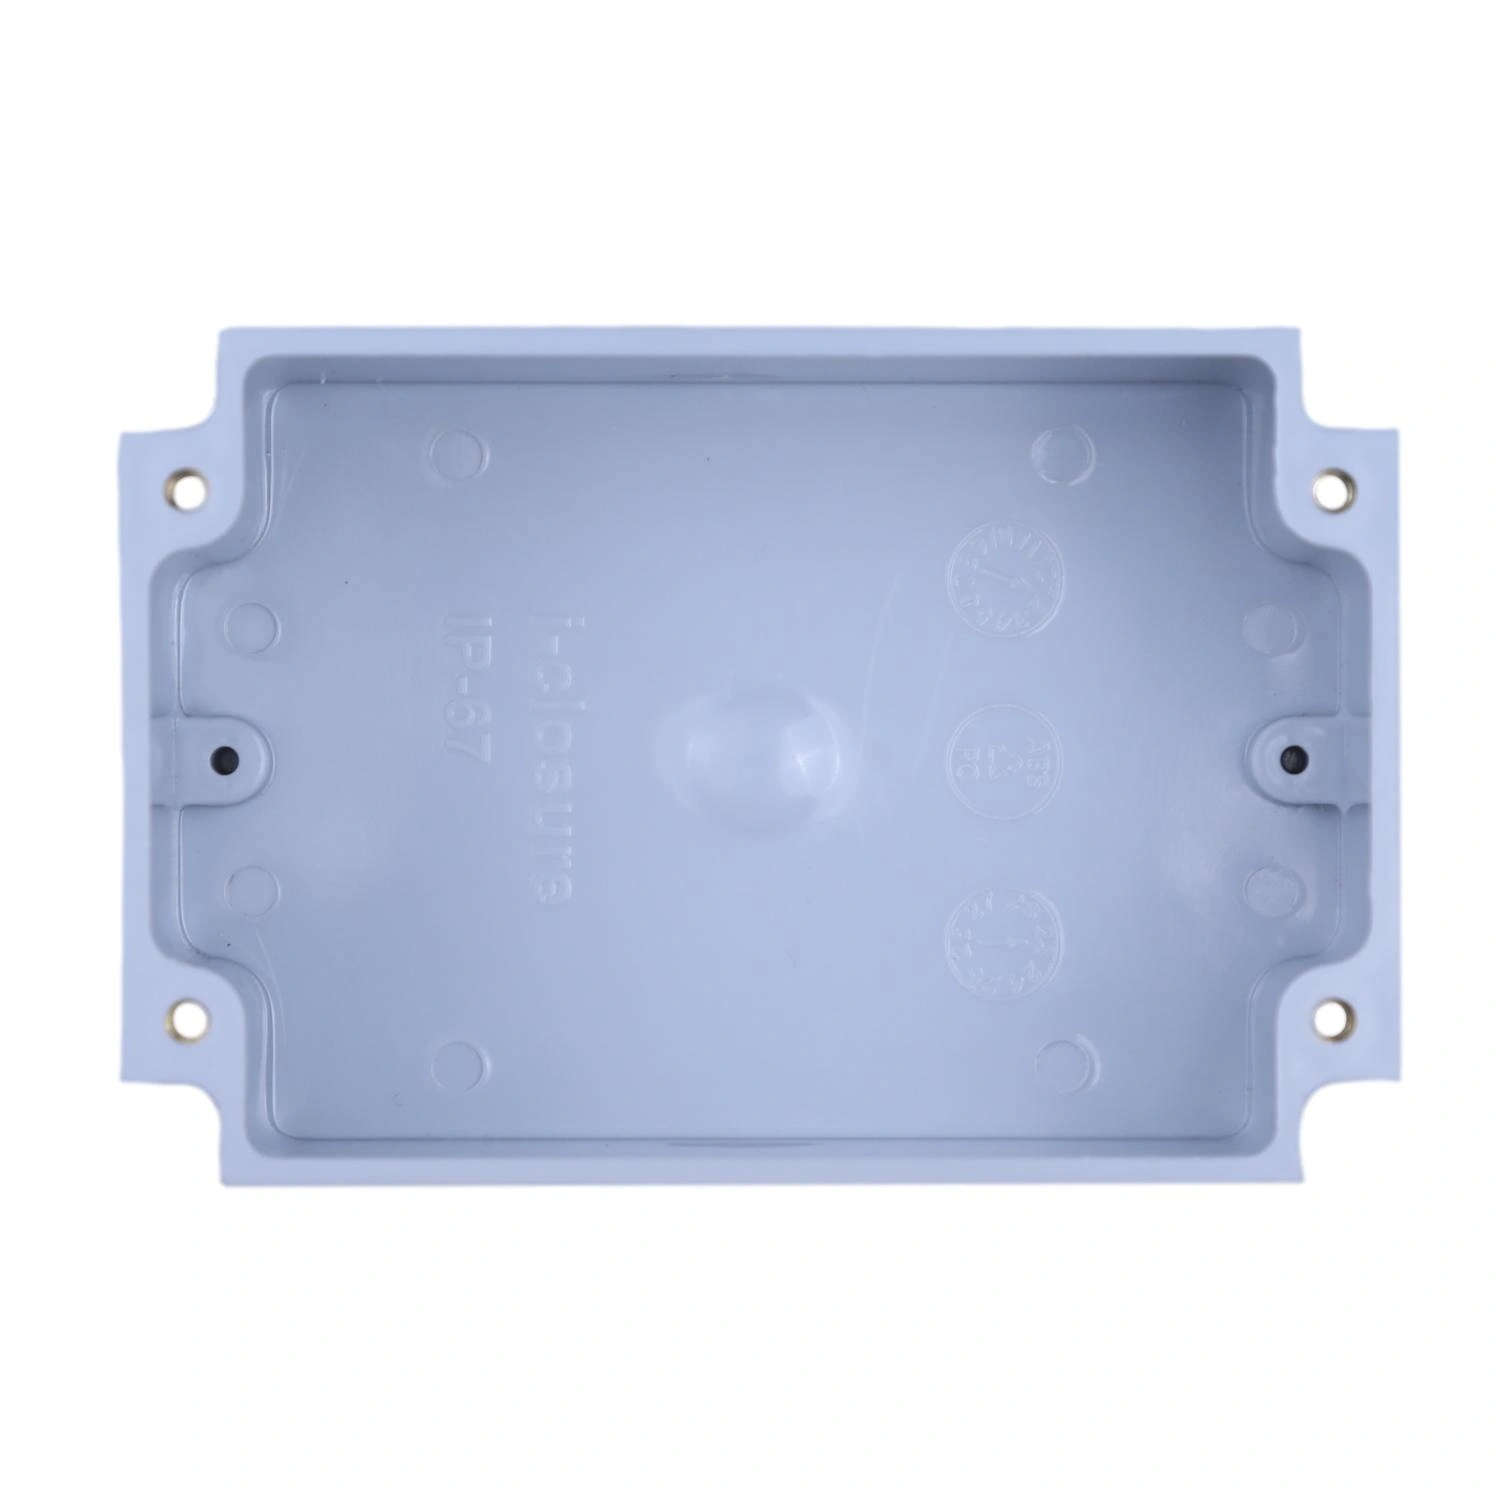 ABS Enclosure 150 x 100 x 70 mm Clear IP67-1